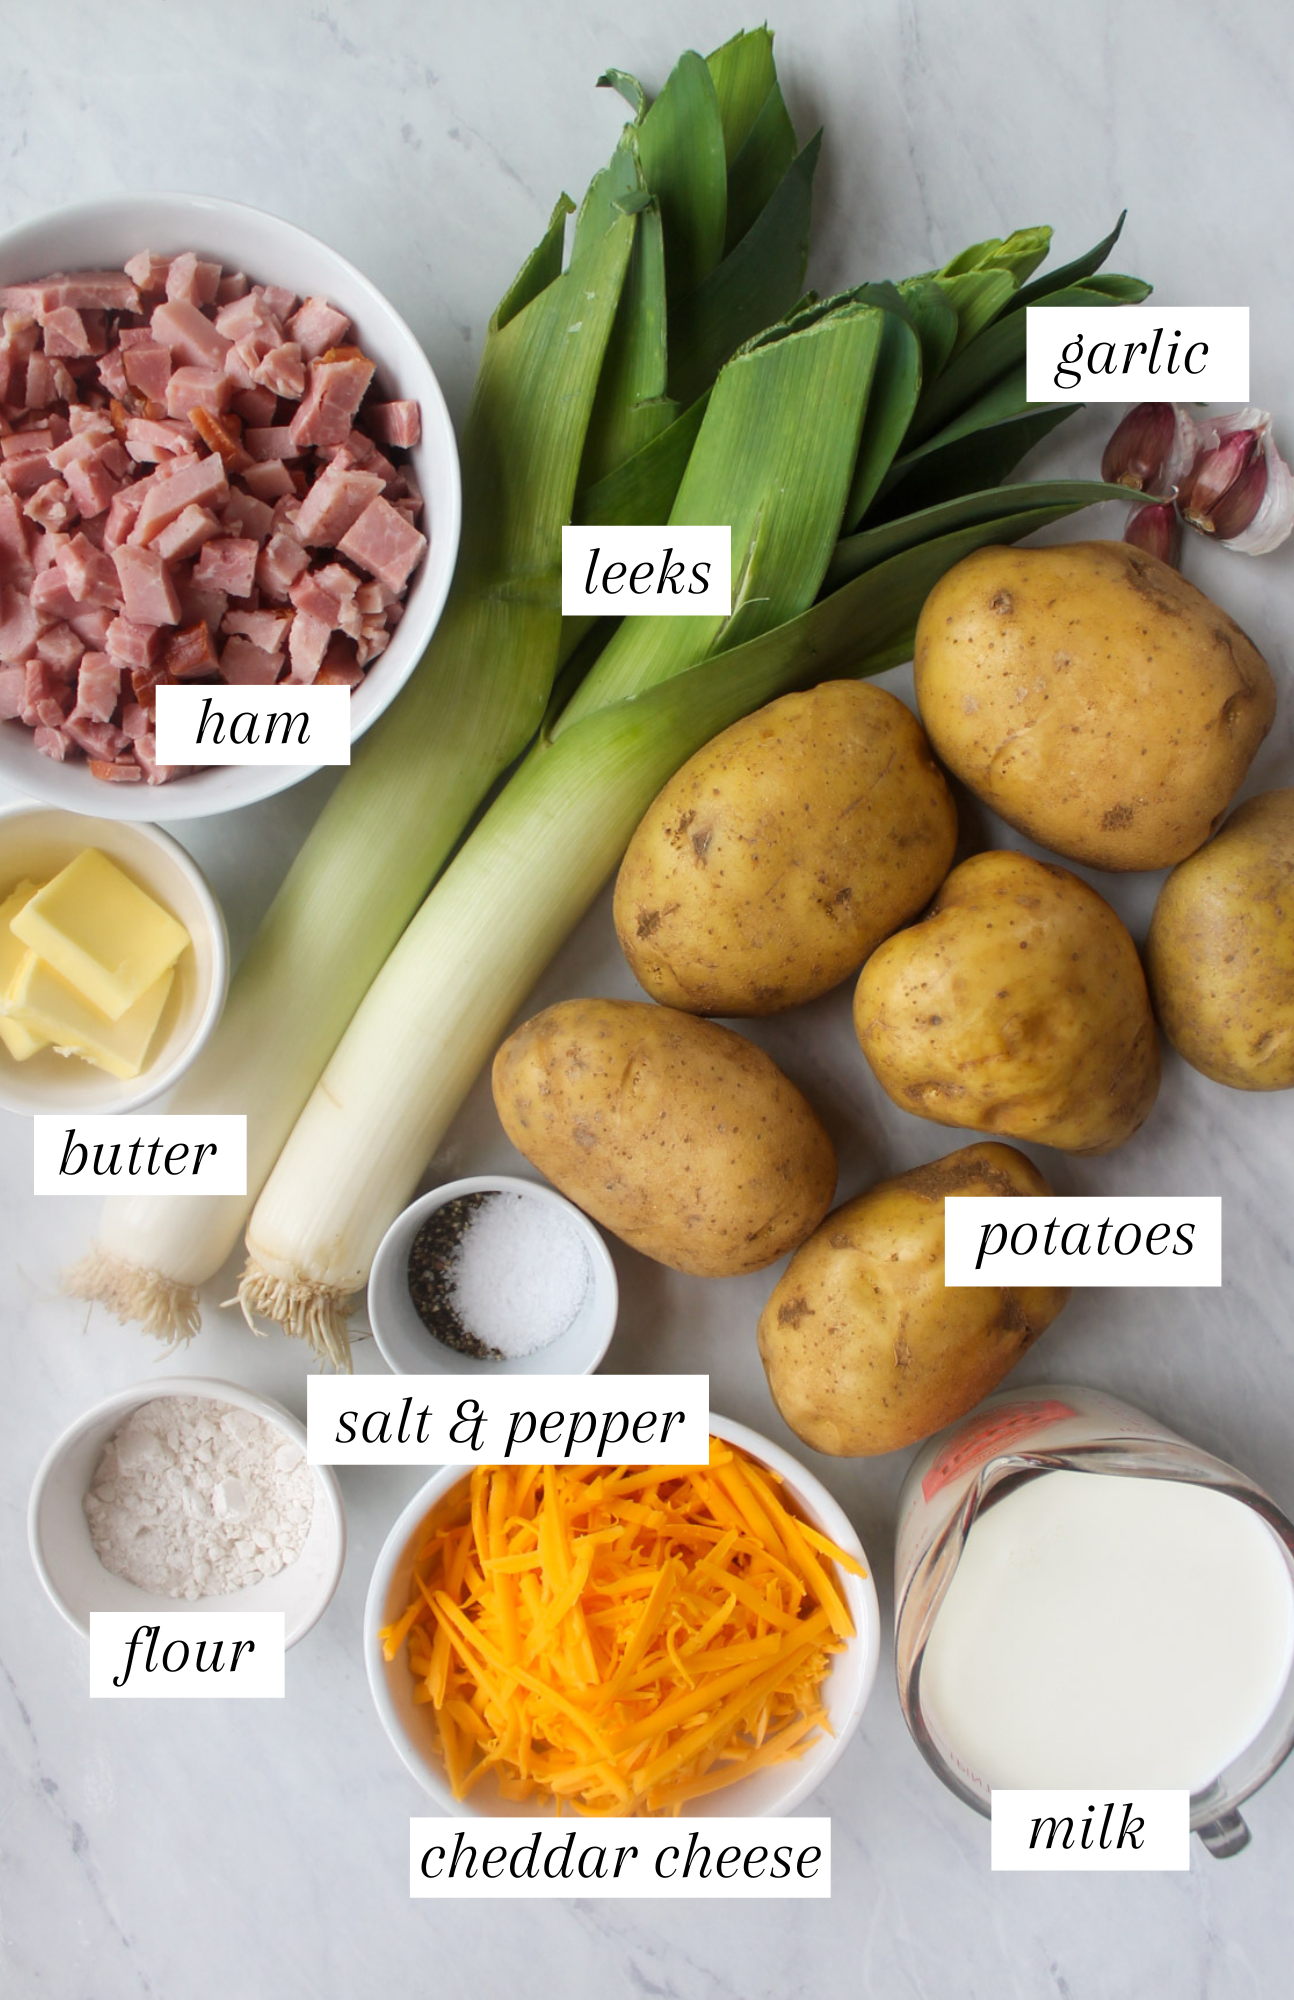 Labeled ingredients for Potato Ham and Leek Soup.